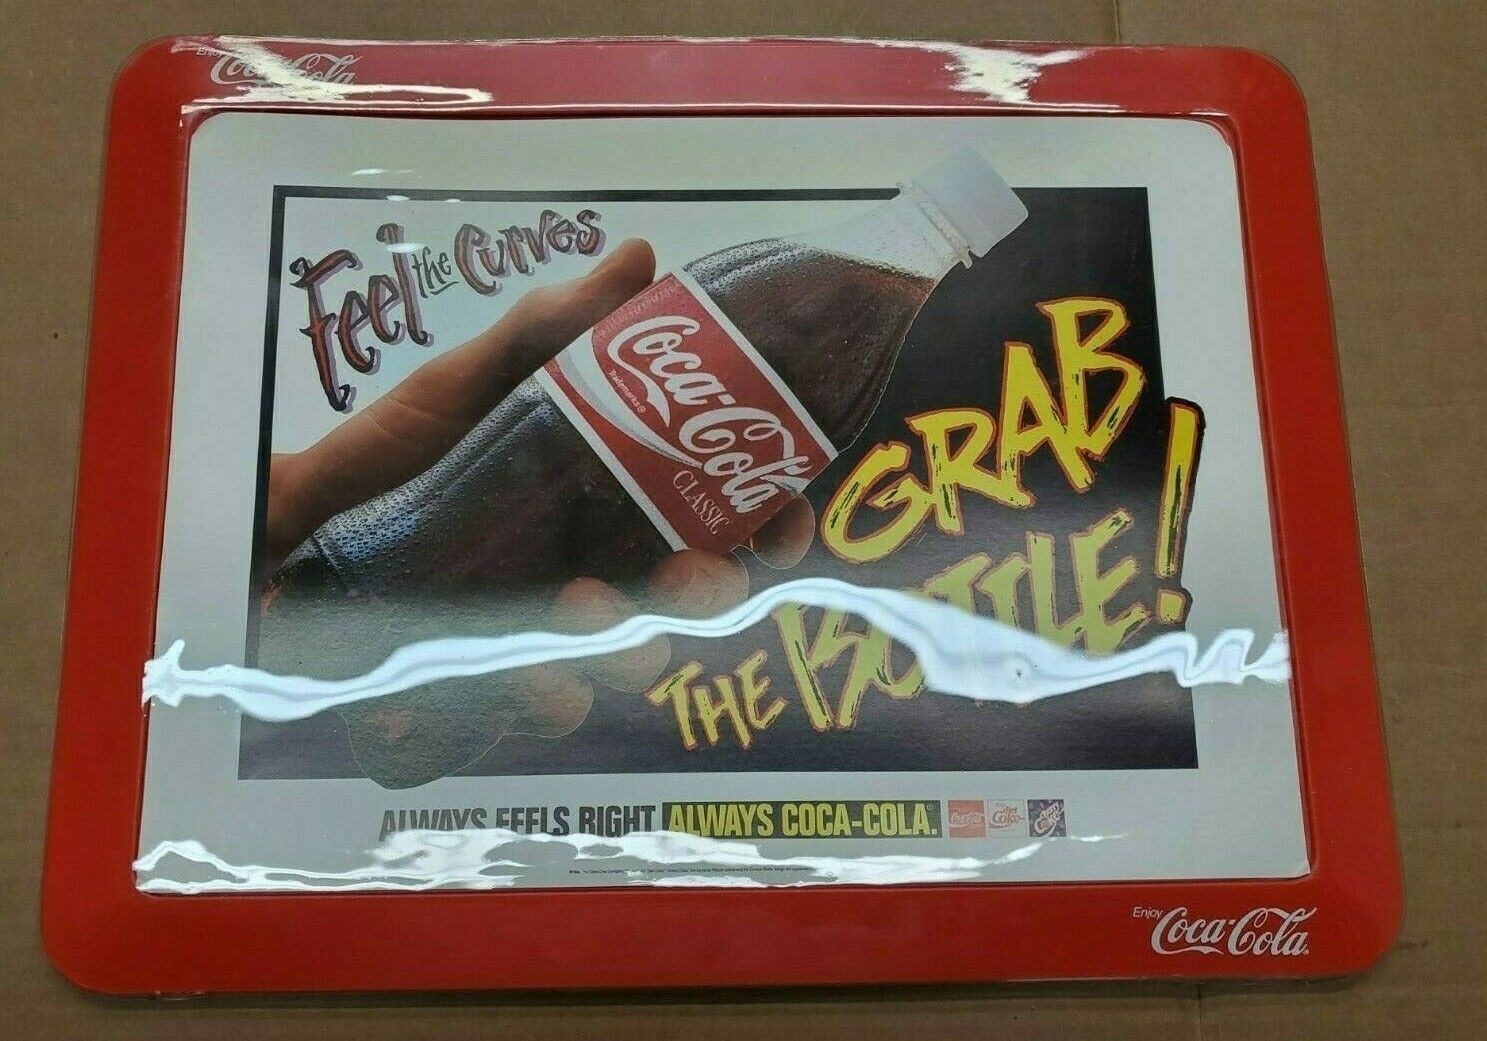  VINTAGE Coca Cola feel the curve grab the bottle classic Sign Display